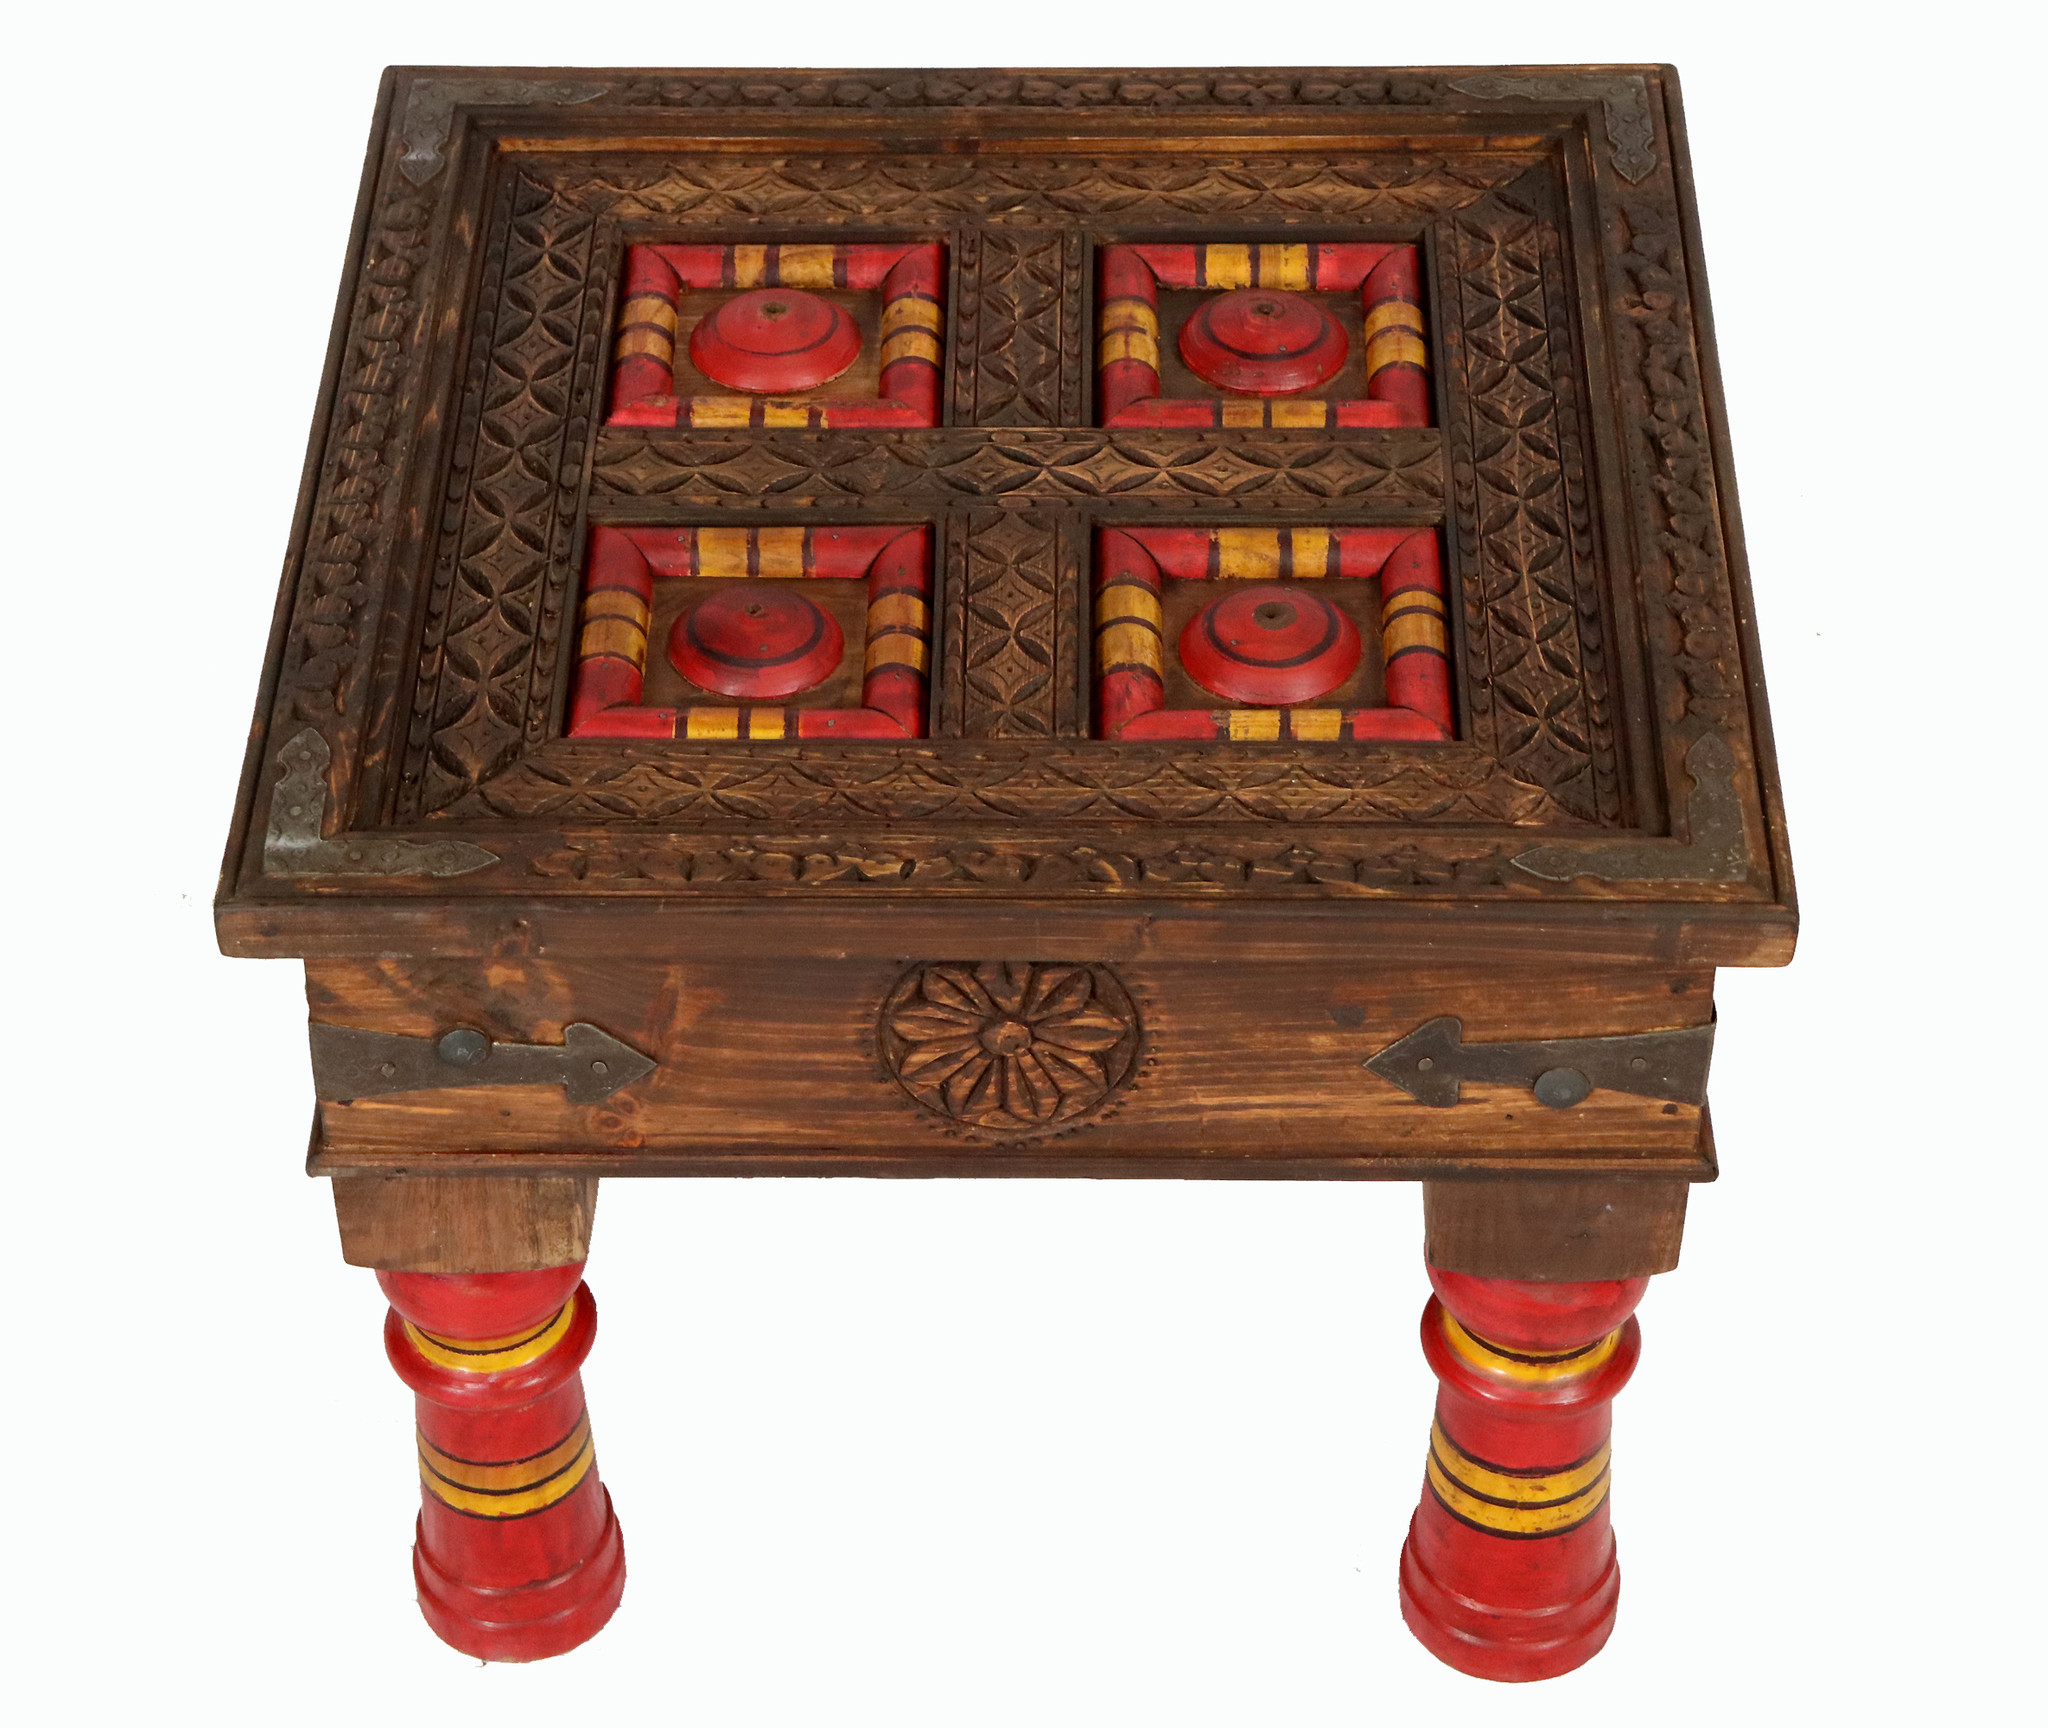 60x60 cm cm antique-look orient colonial solid wood hand-carved  table  Coffee Table living room table  from Afghanistan nuristan PJ